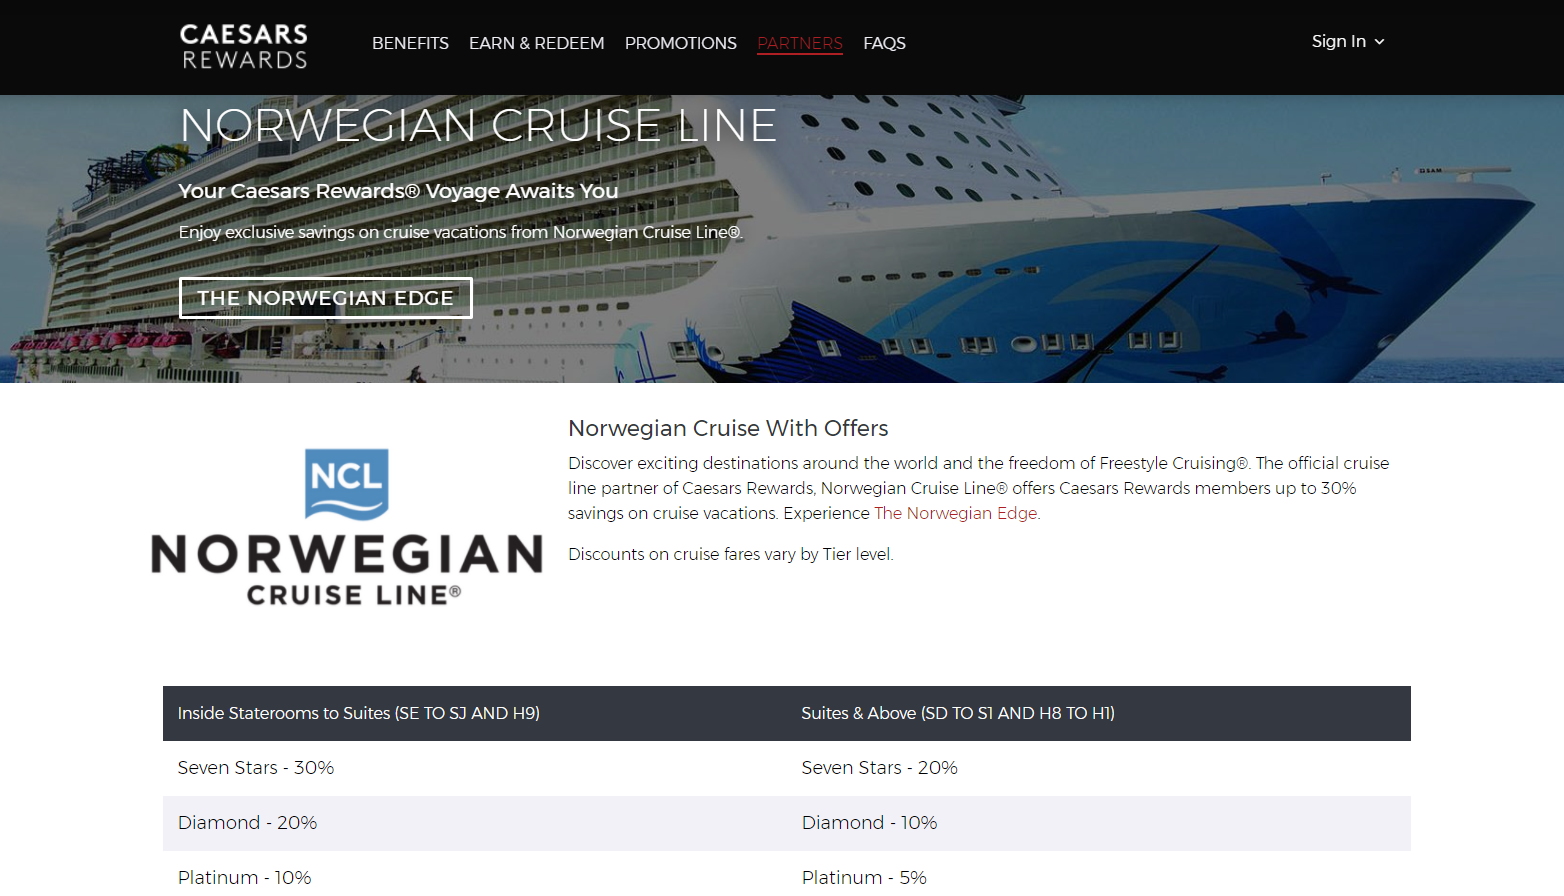 caesars rewards partner with NCL Eye of the Flyer